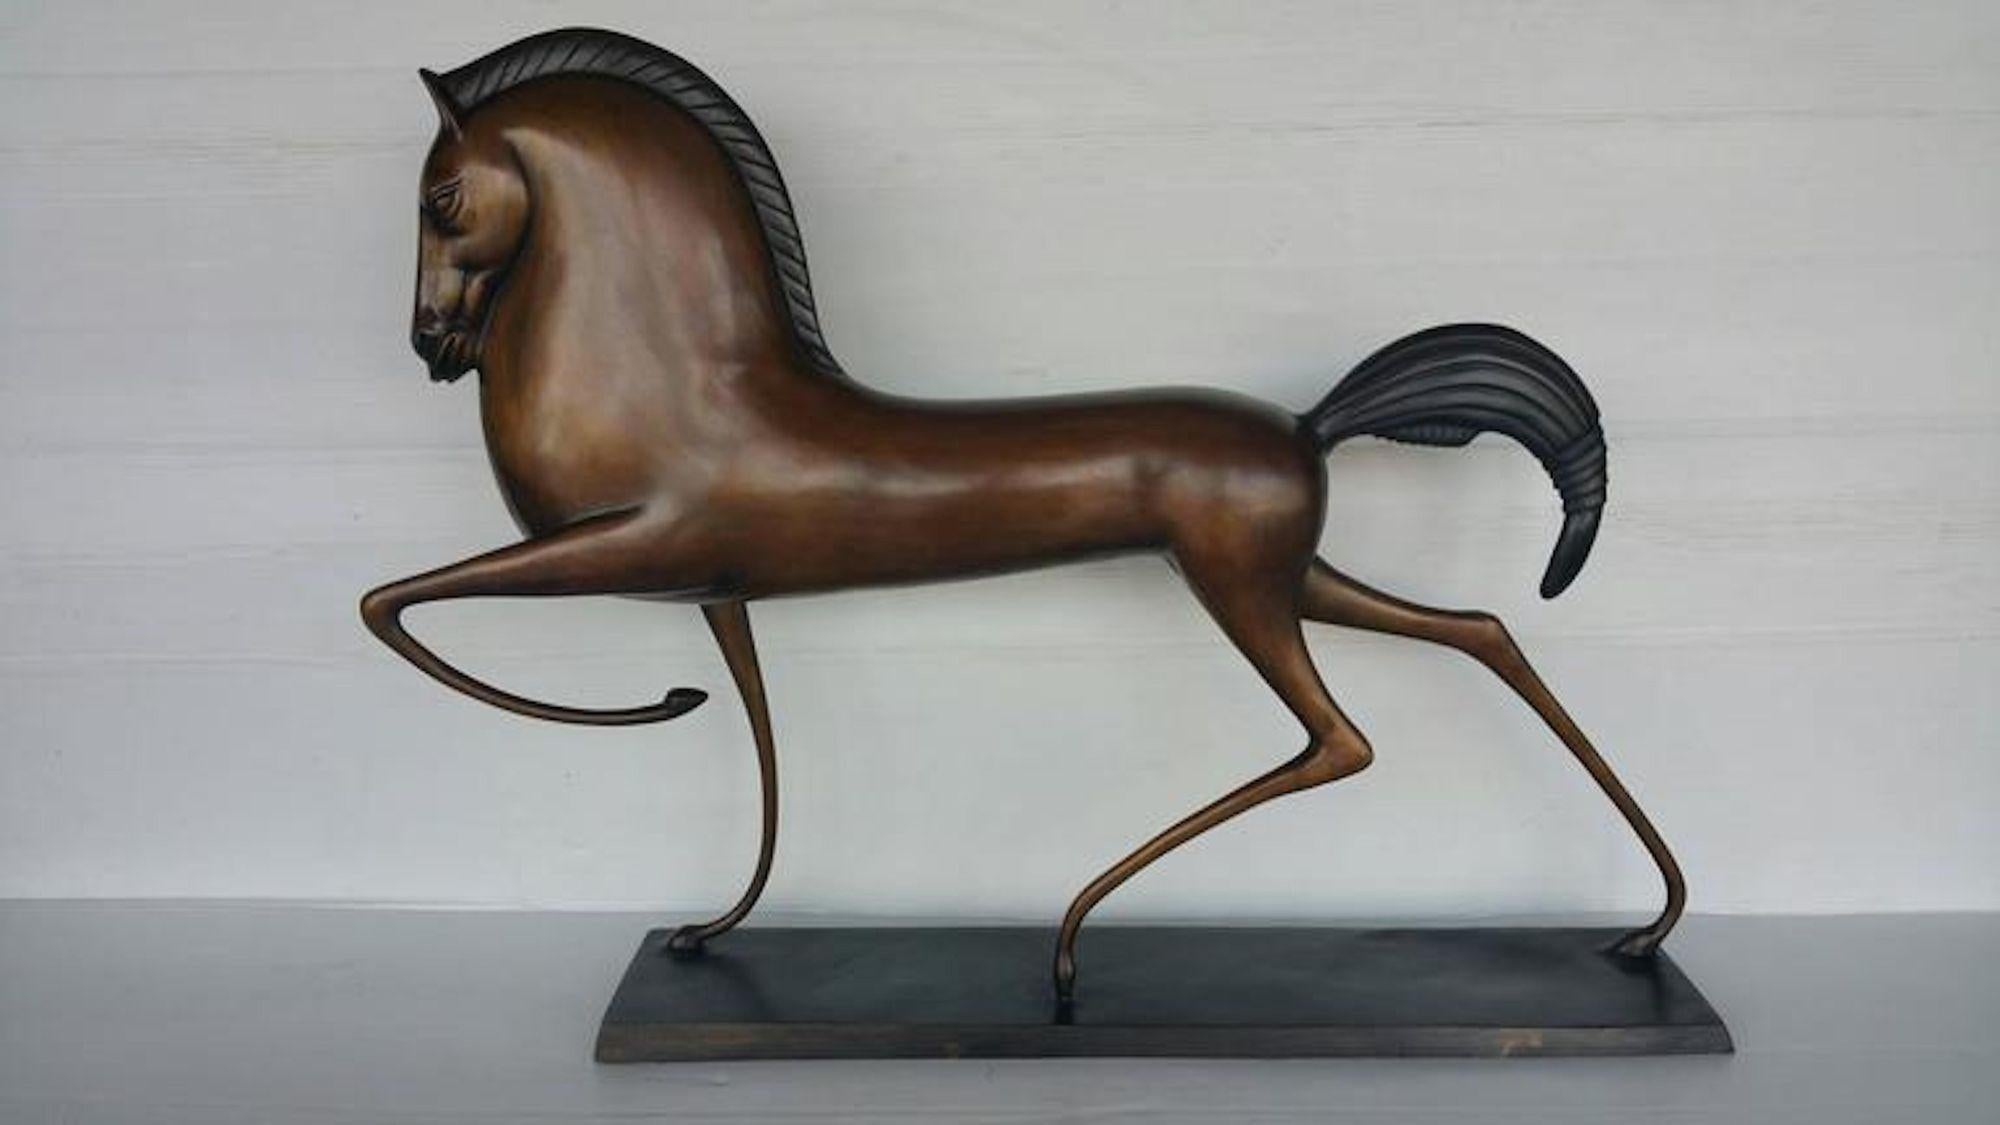 Bronze Etruscan horse sculpture in the manner of boris lovet-borski was the form of figurative art produced by the Etruscan civilization in Northern Italy between the 9th and 2nd centuries b.C. Particularly strong in this tradition were figurative